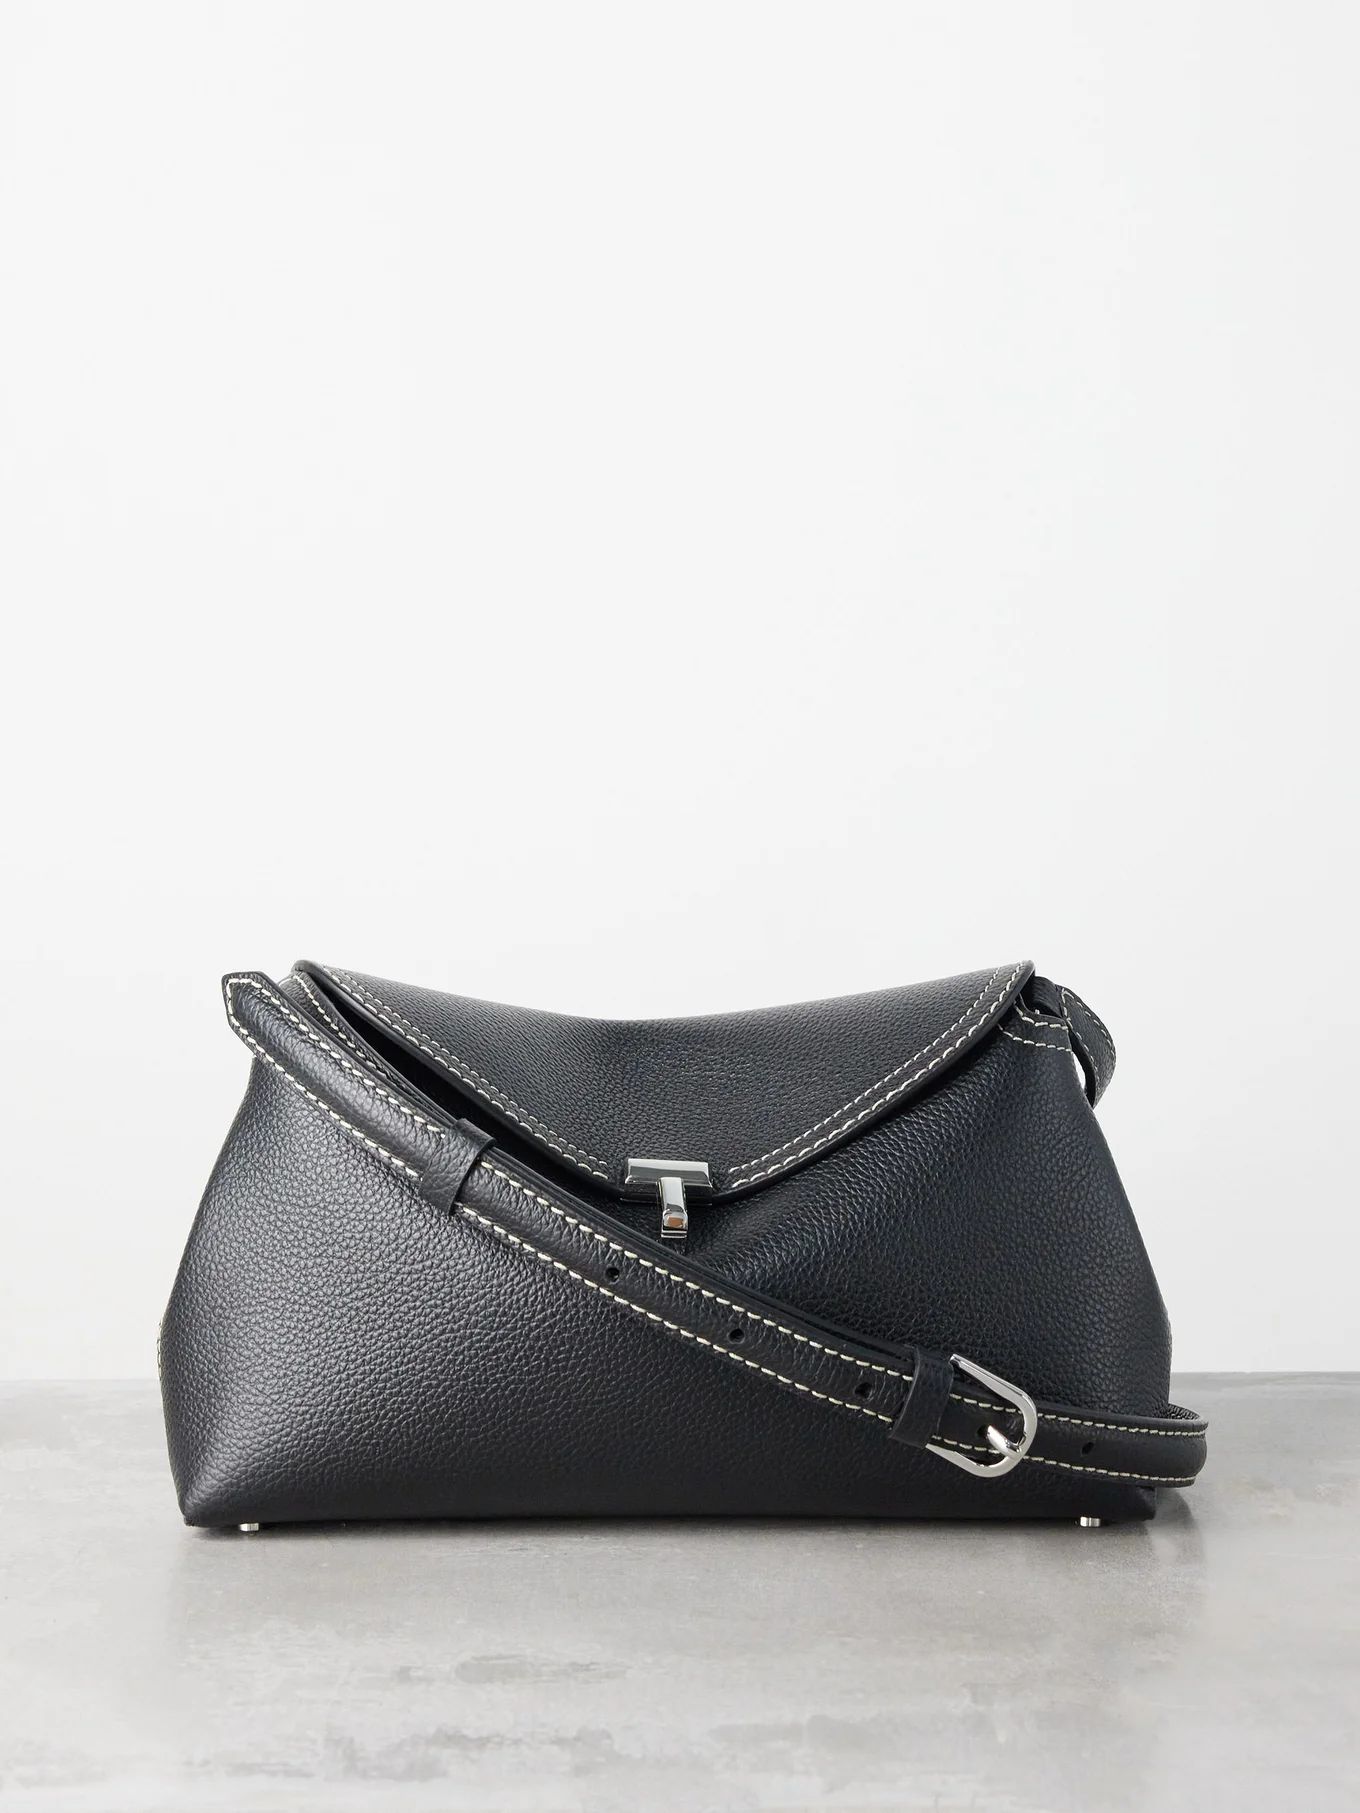 T-lock leather cross-body bag | Toteme | Matches (US)